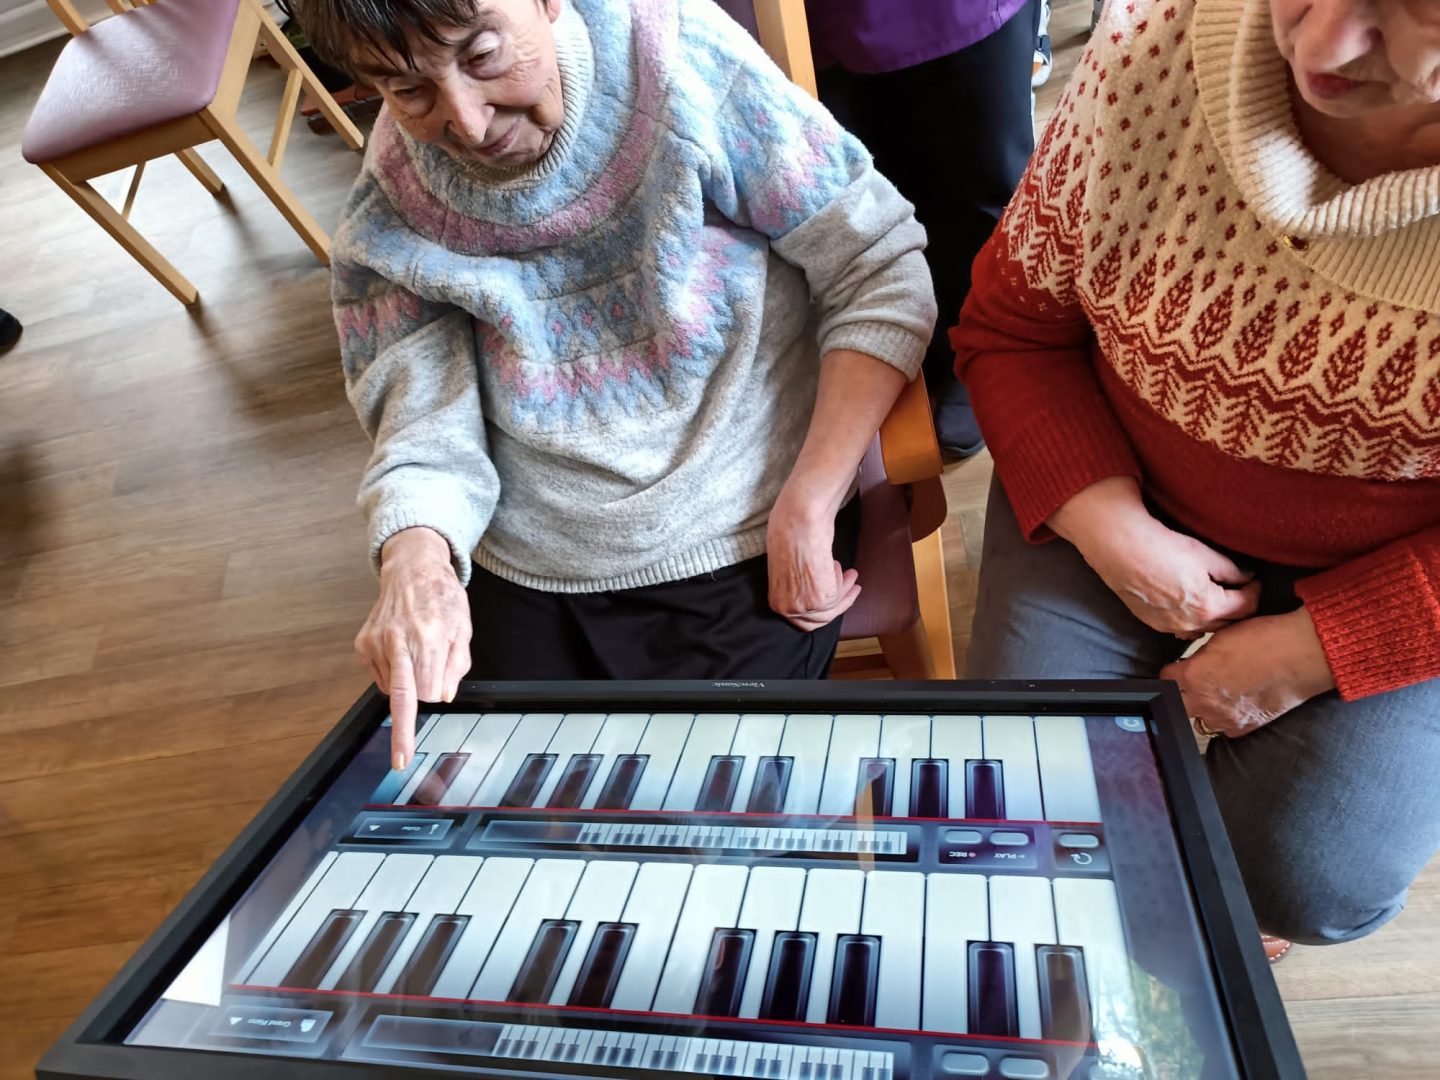 The Serene mobile interactive screen being used in a table position for care home activity time